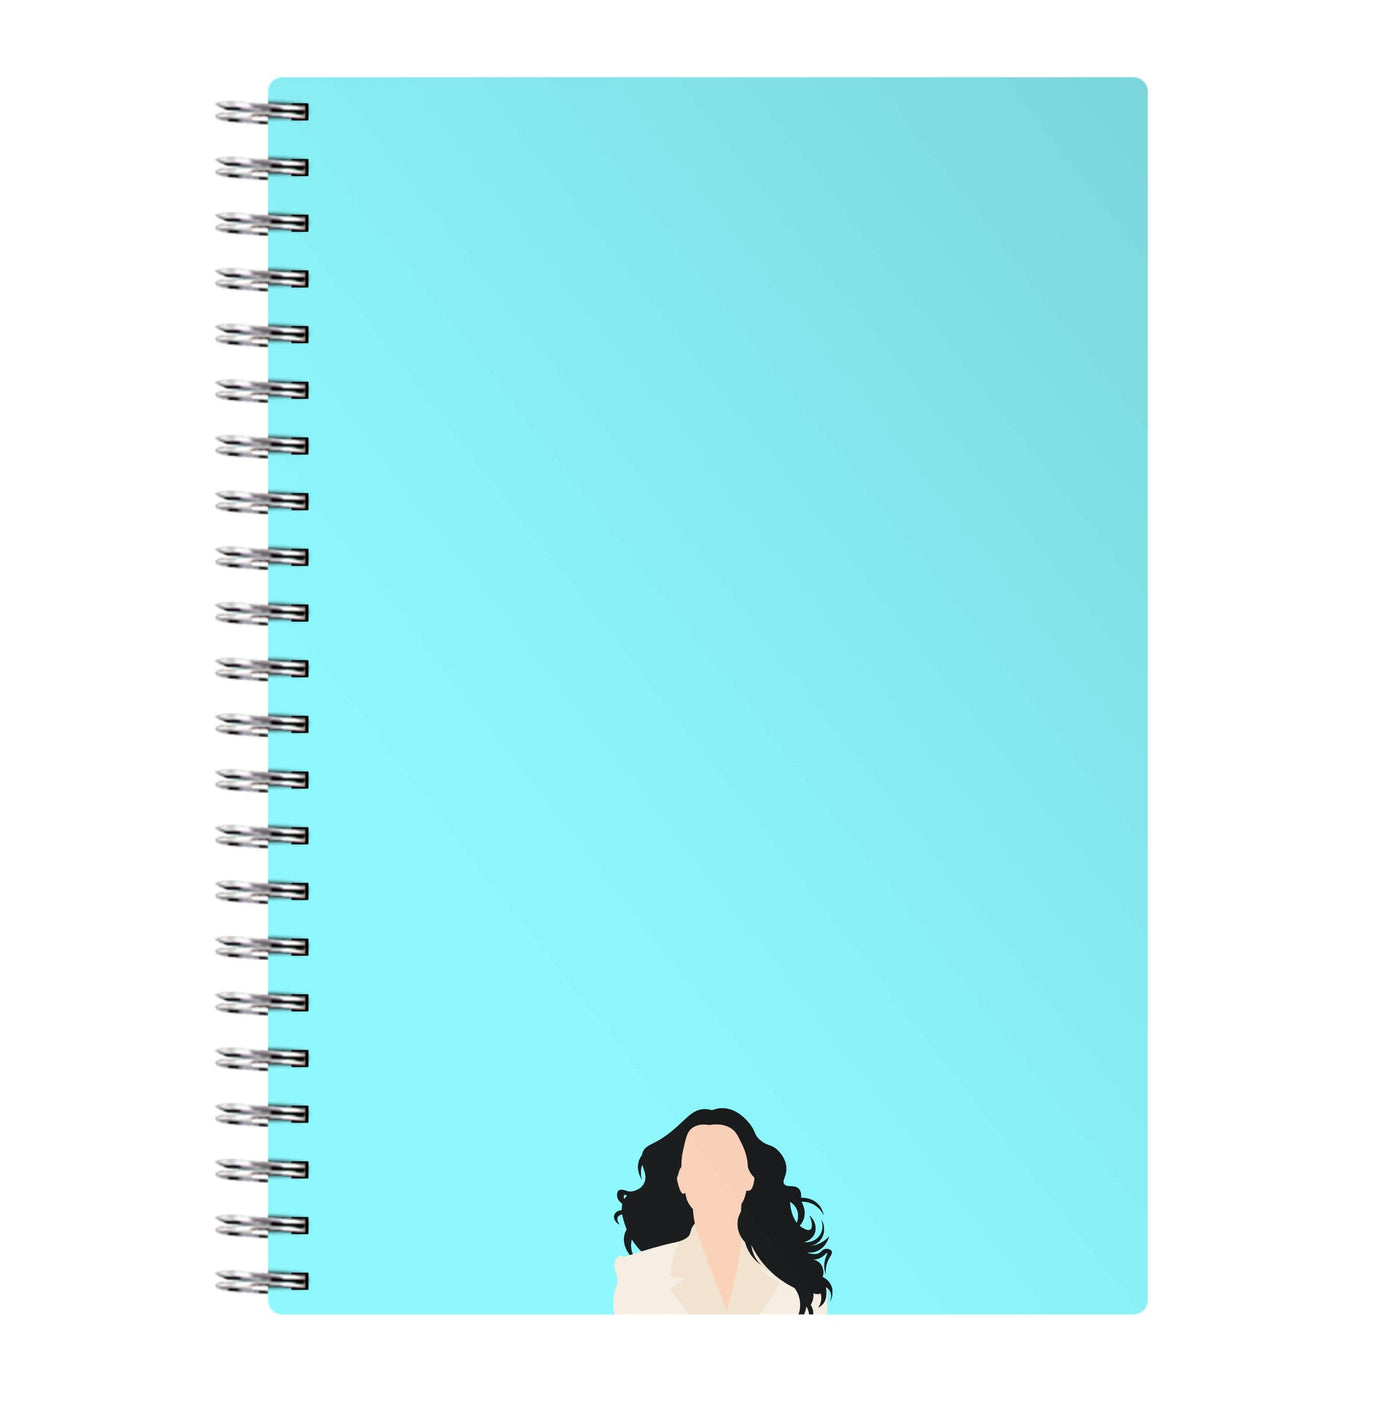 Her - Katy Perry Notebook